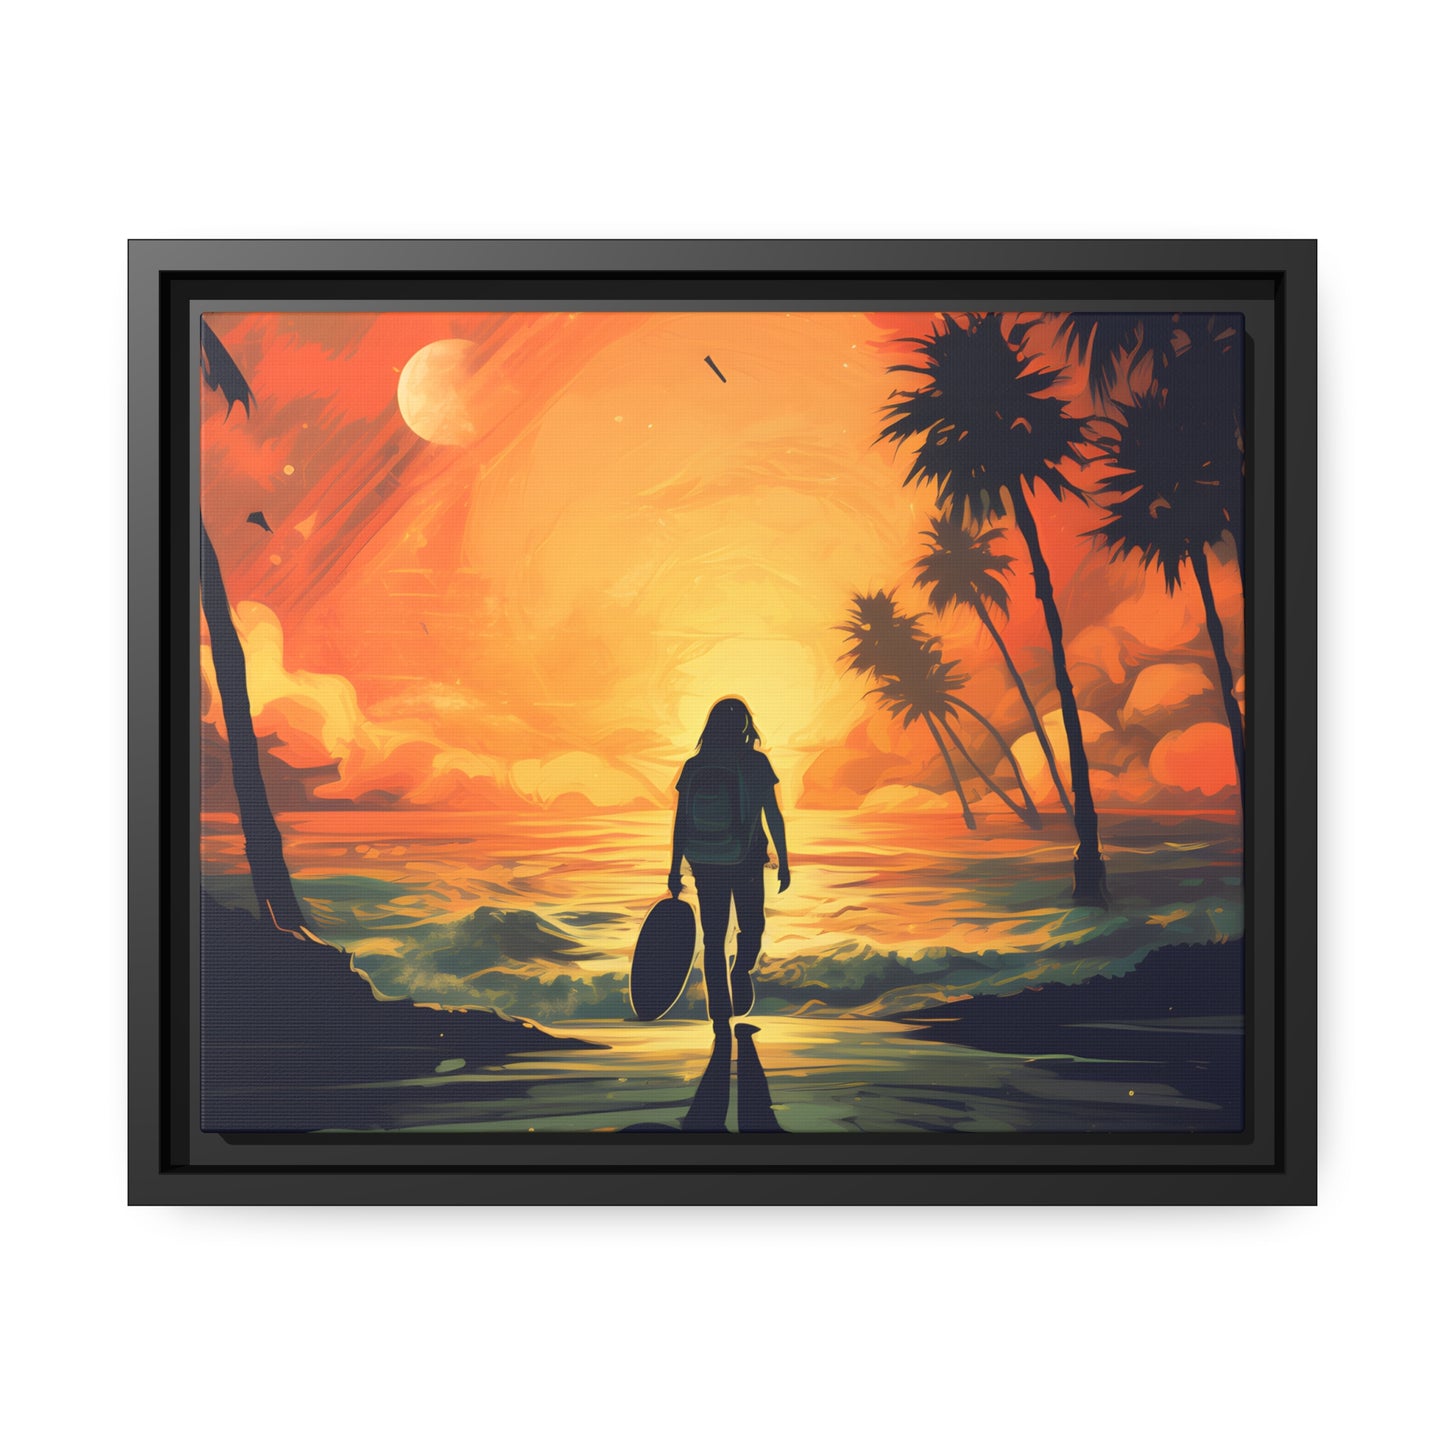 Framed Canvas Artwork Beach Ocean Surfing Warm Suns Set Art Surfer Walking Down To The Beach Holding Surfboard Palm Tree Silhouettes Sets The Tone Floating Frame Canvas Artwork